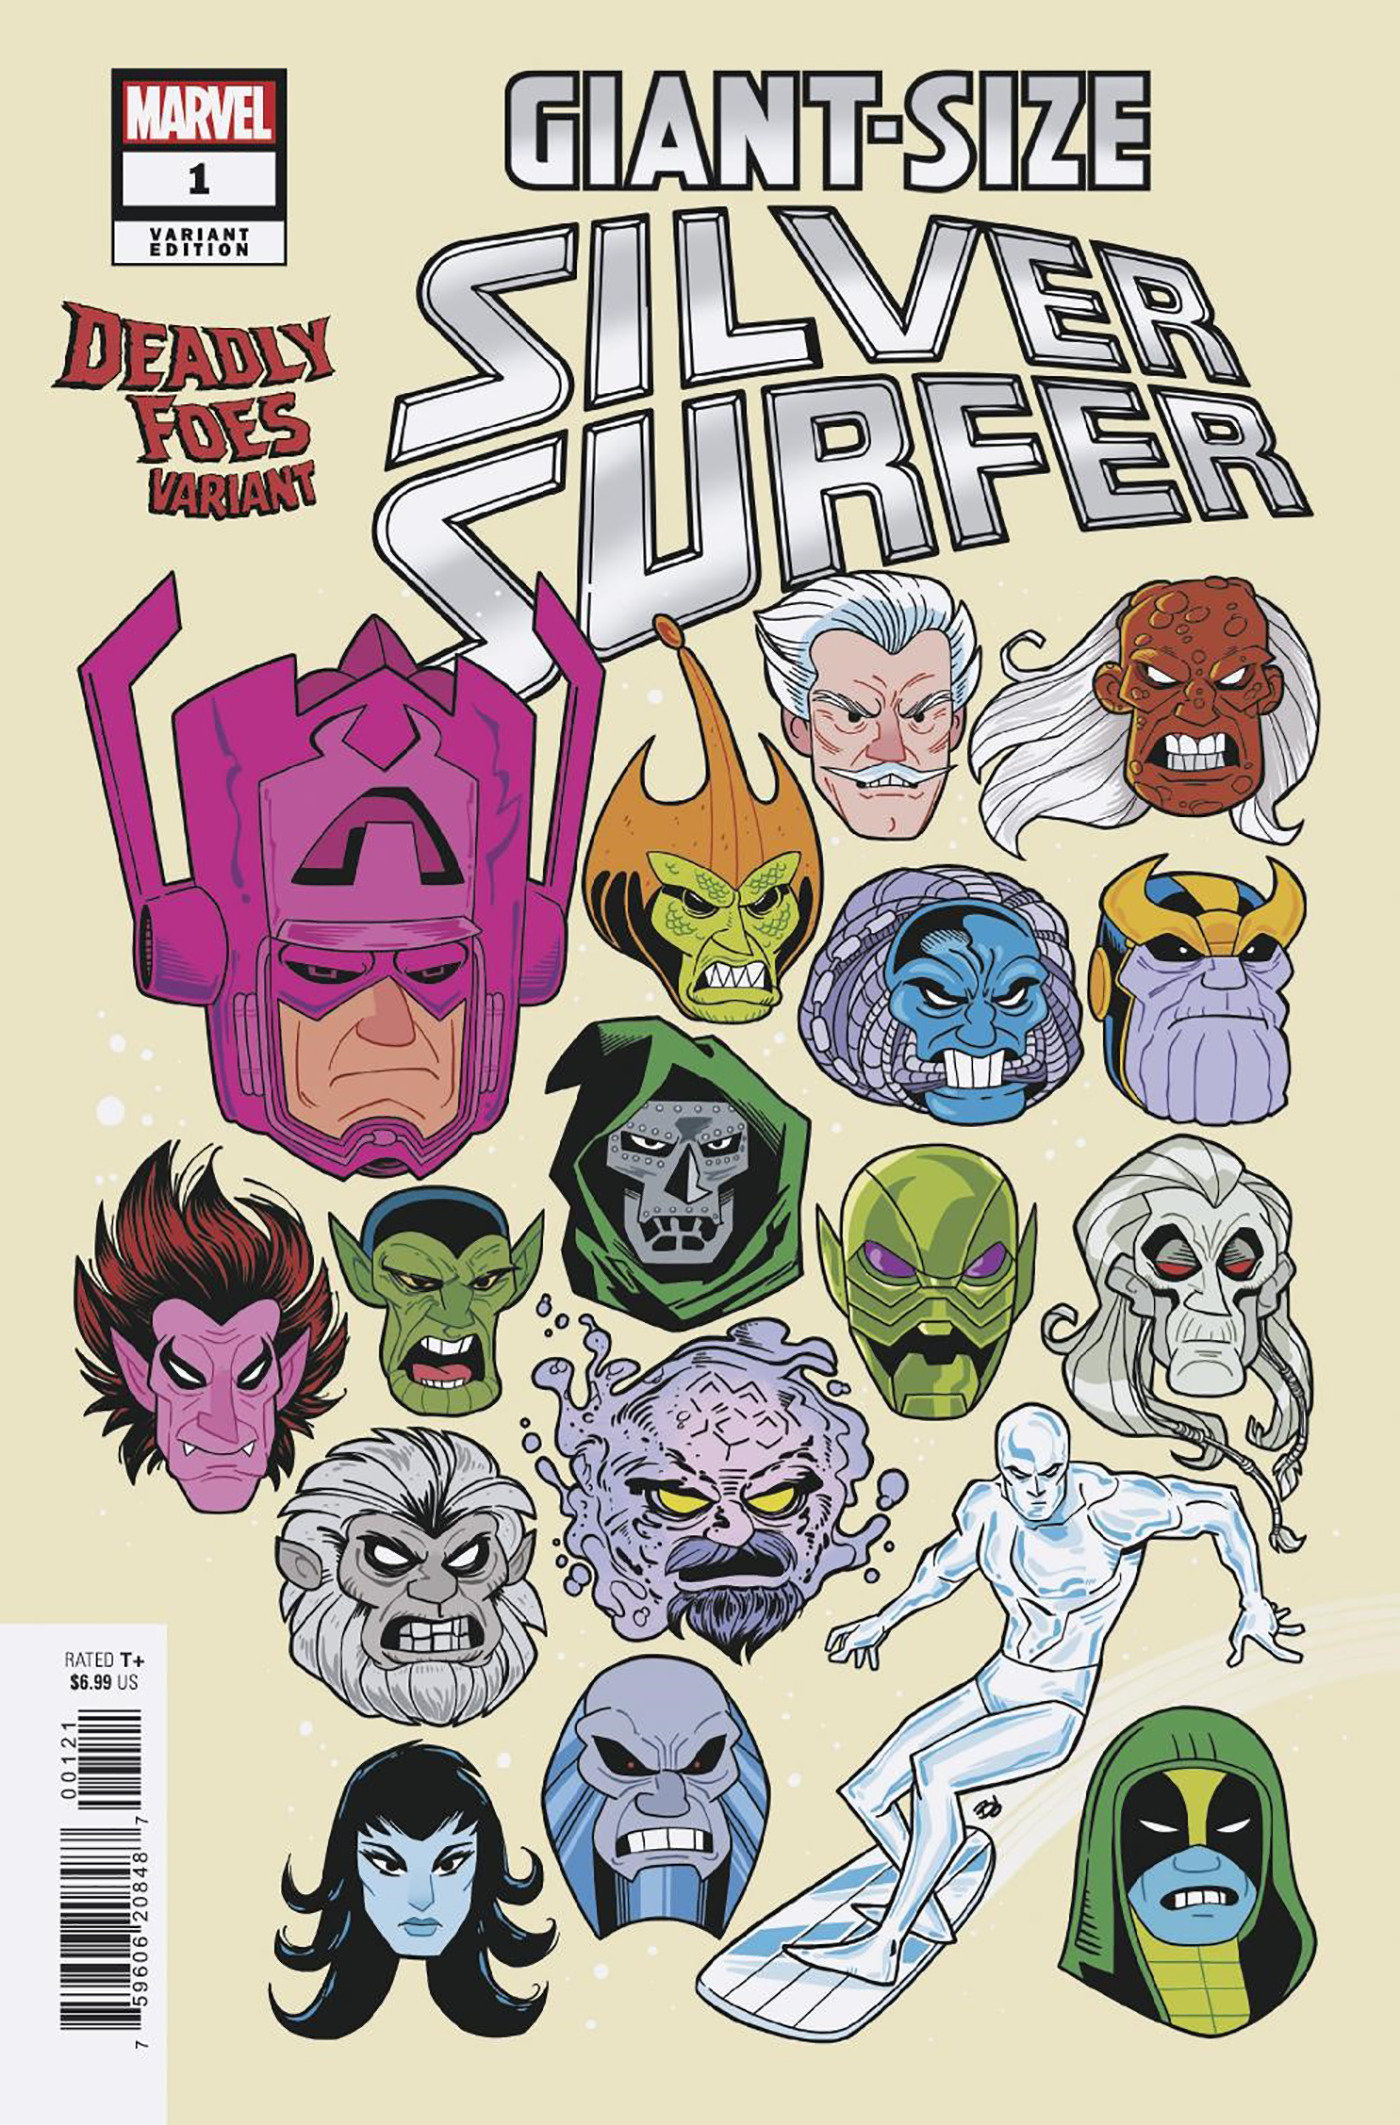 Giant-Size Silver Surfer #1 Dave Bardin Deadly Foes Variant